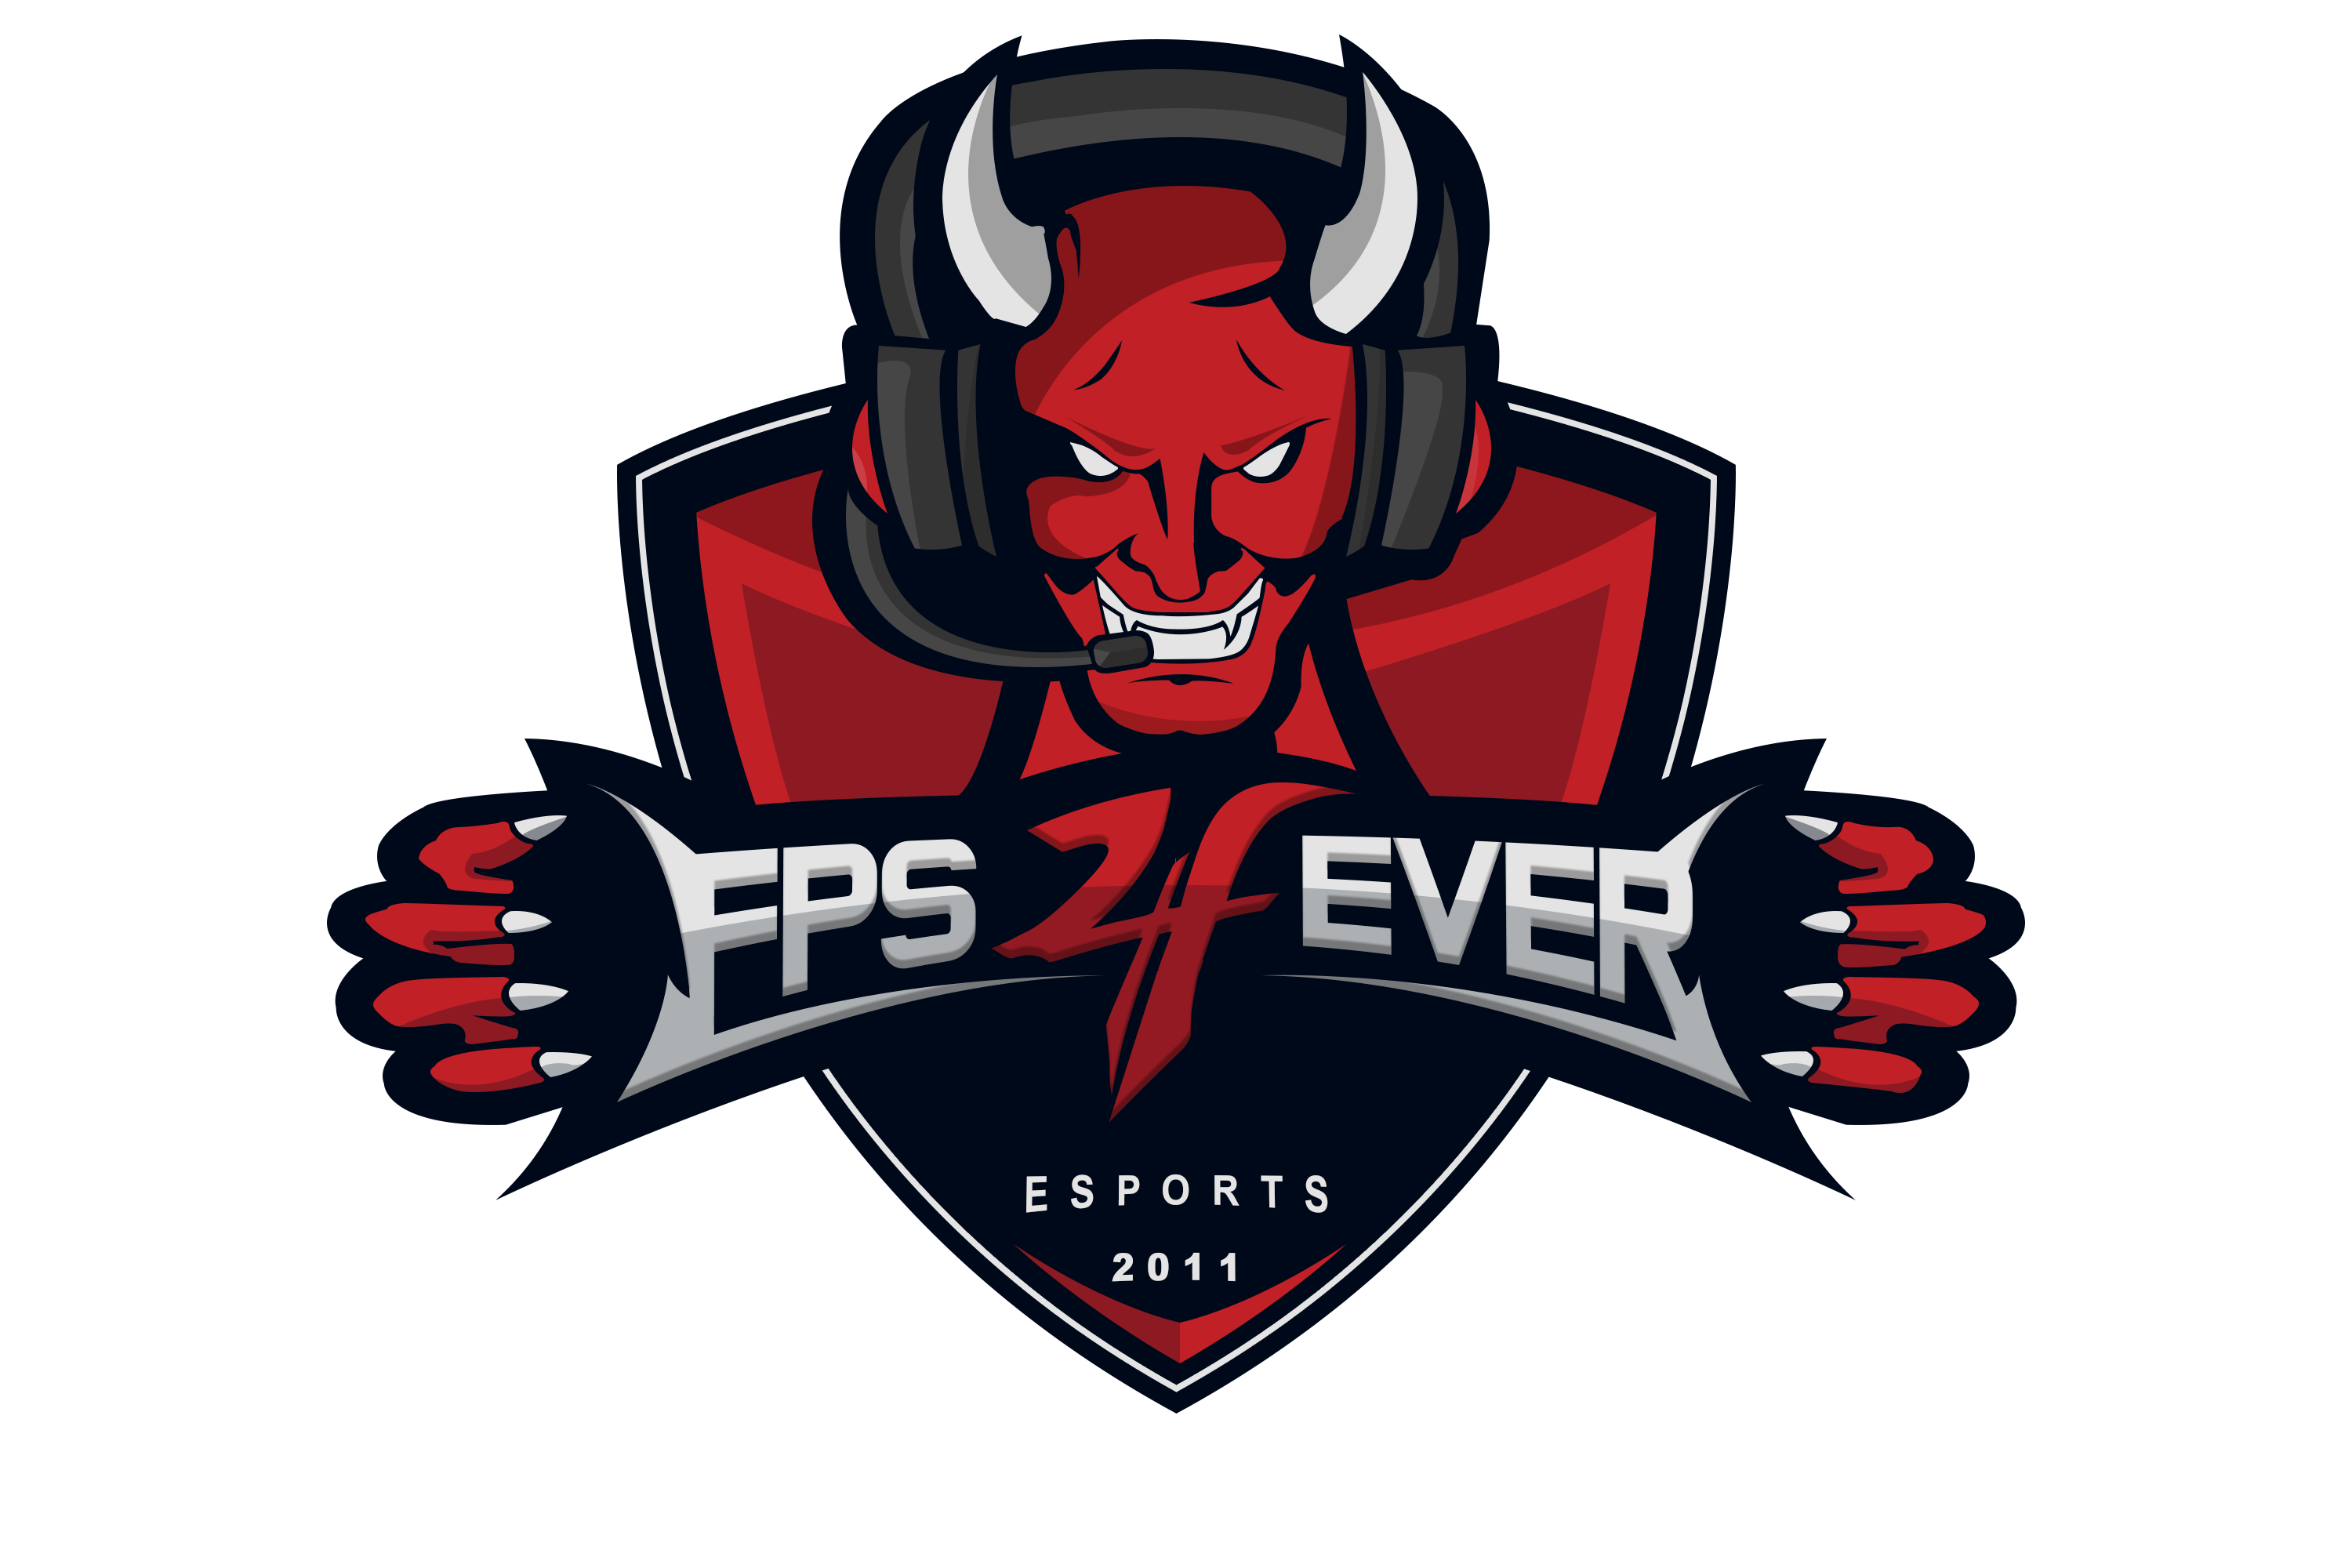 FPS4EVER